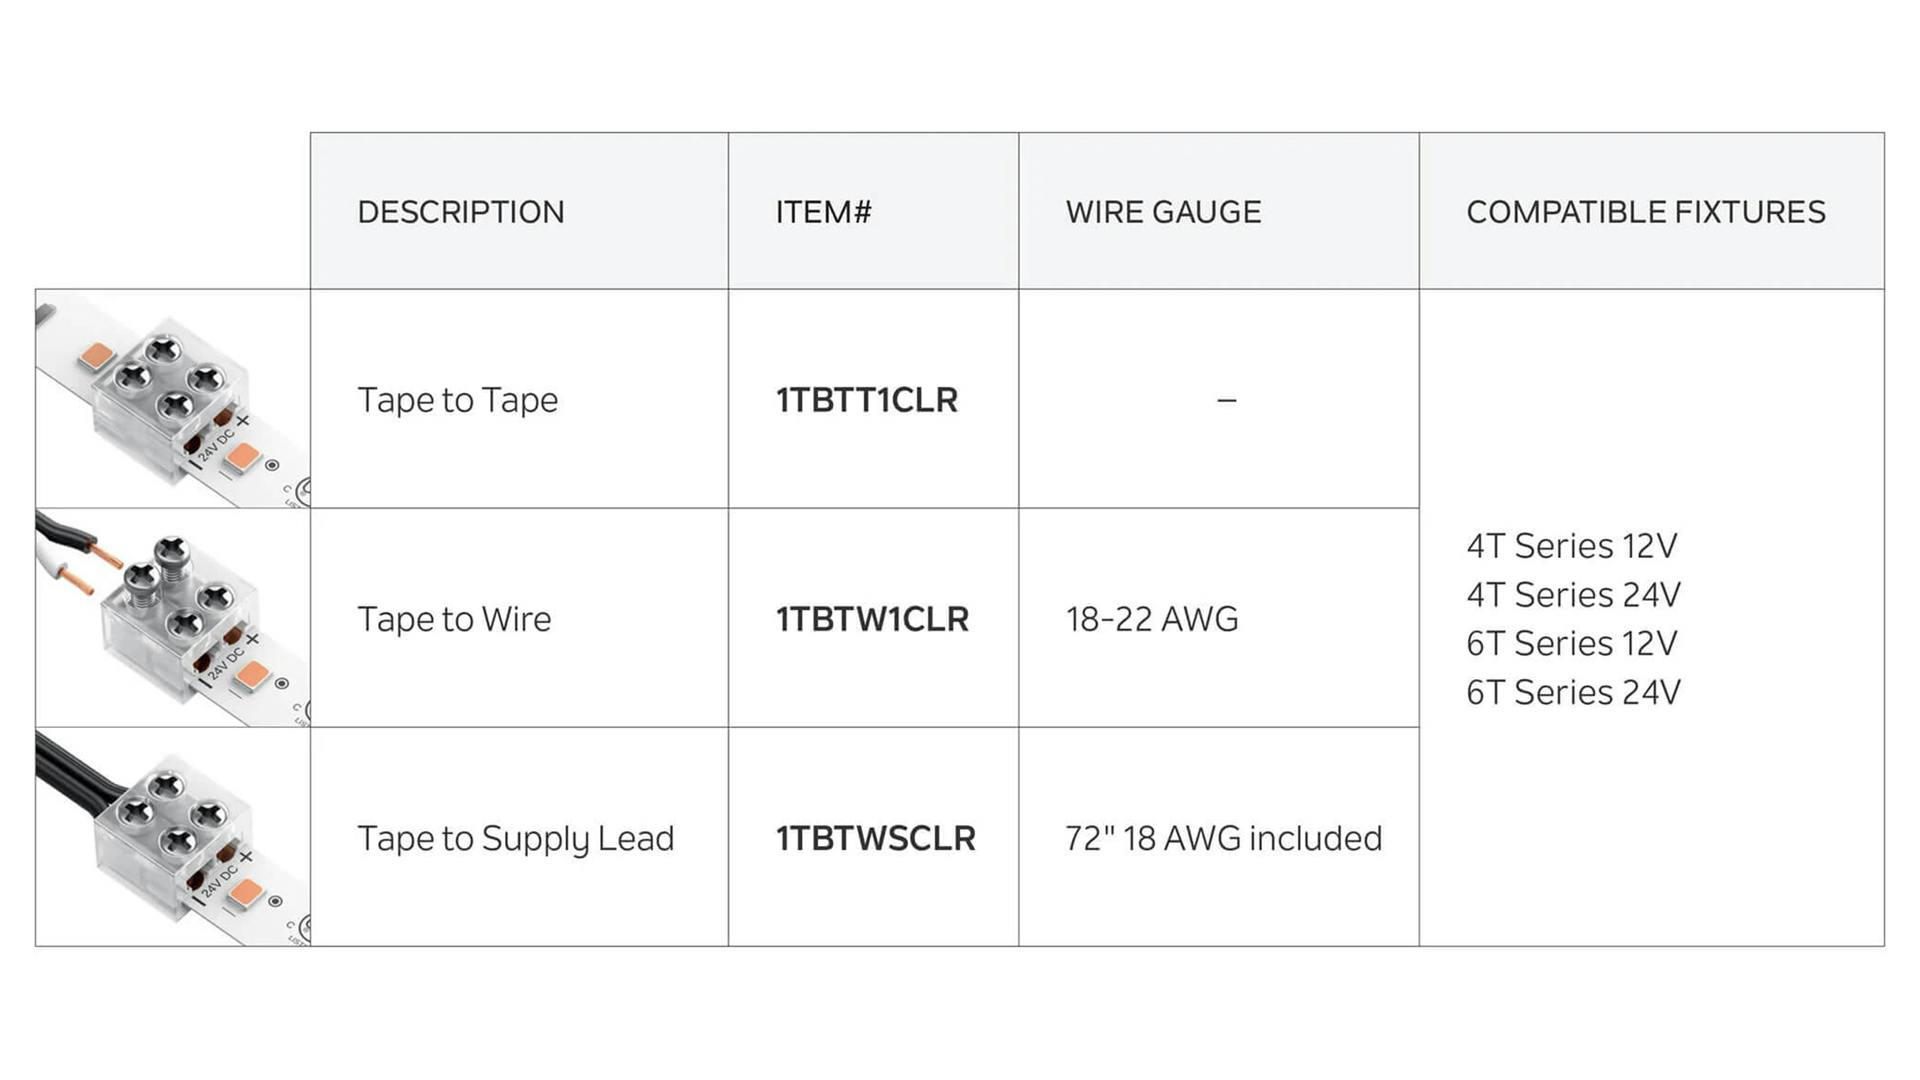 Chart of three tape connectors featuring description, item numbers, wire gauge and compatible fixtures